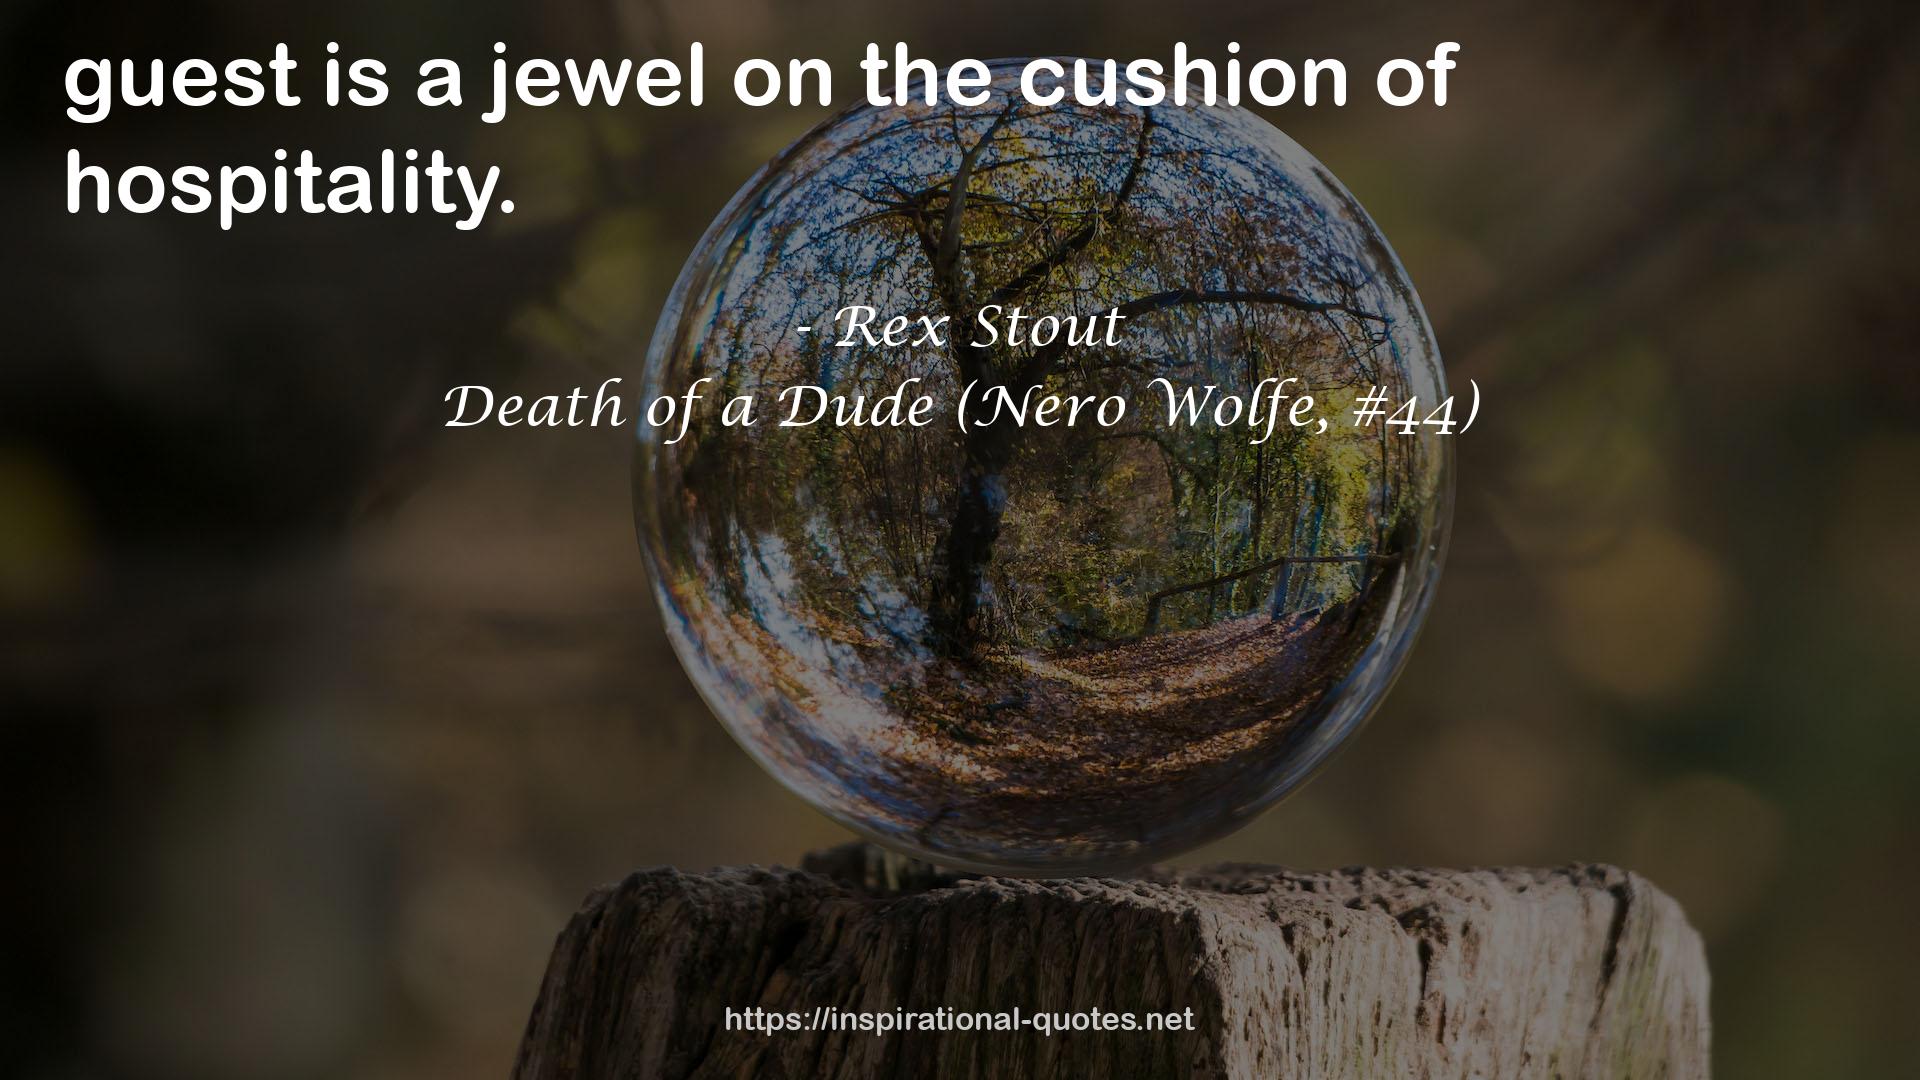 Death of a Dude (Nero Wolfe, #44) QUOTES